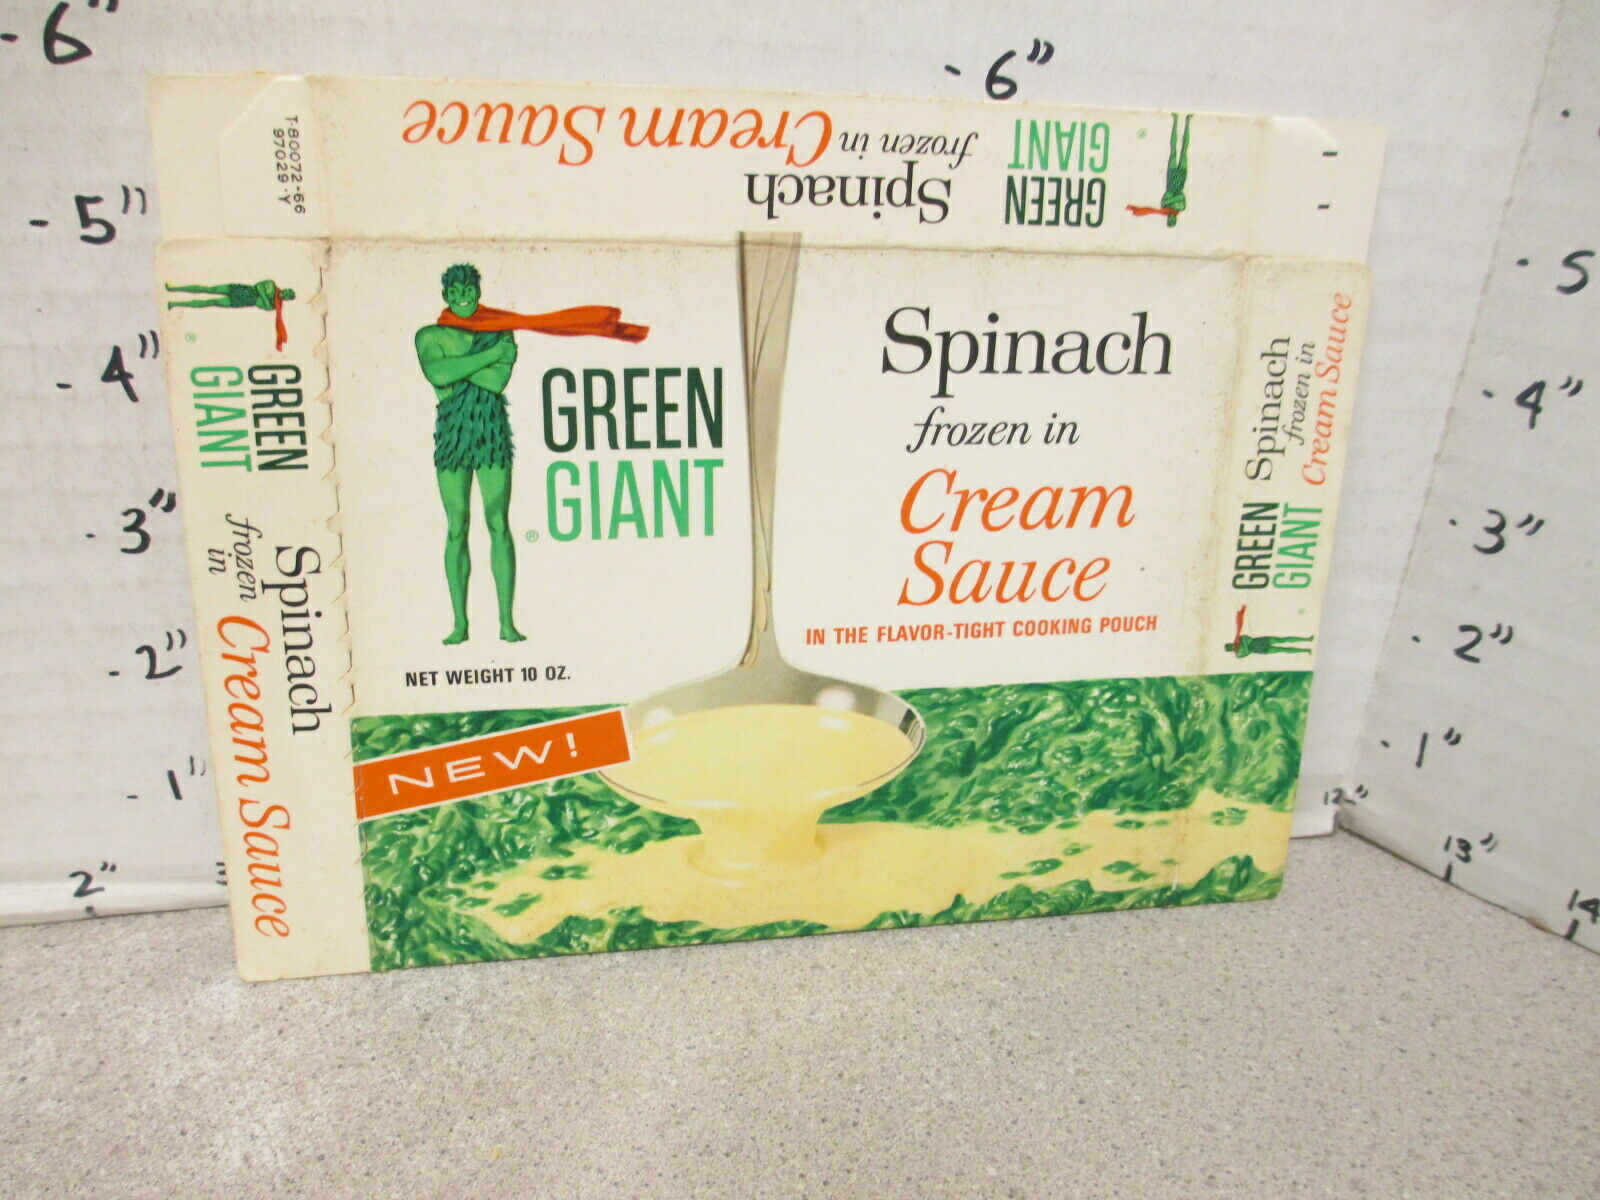 Green Giant 1960s Spinach Cream Sauce Vintage Frozen Vegetable Food (1) Box